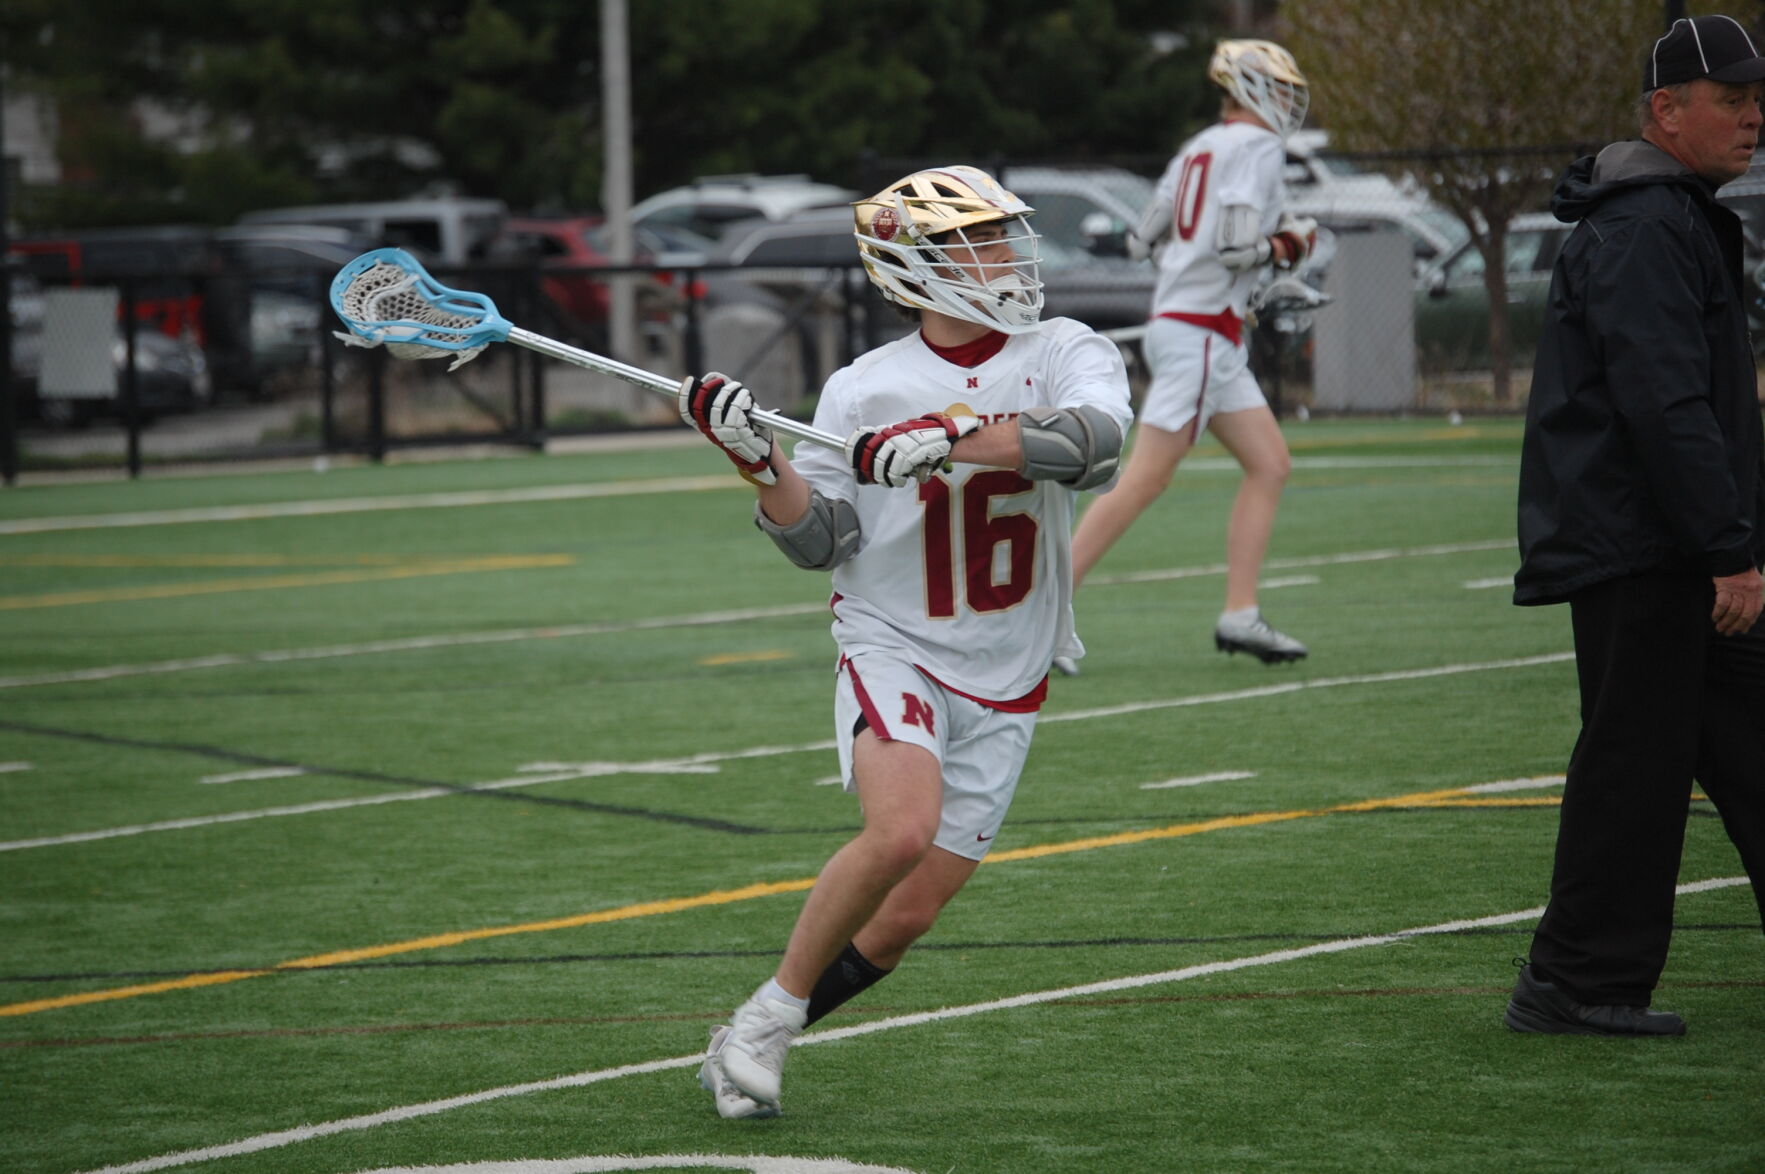 Newburyport Boys Lacrosse Dominates Pentucket with Balanced Attack and Strong Defense